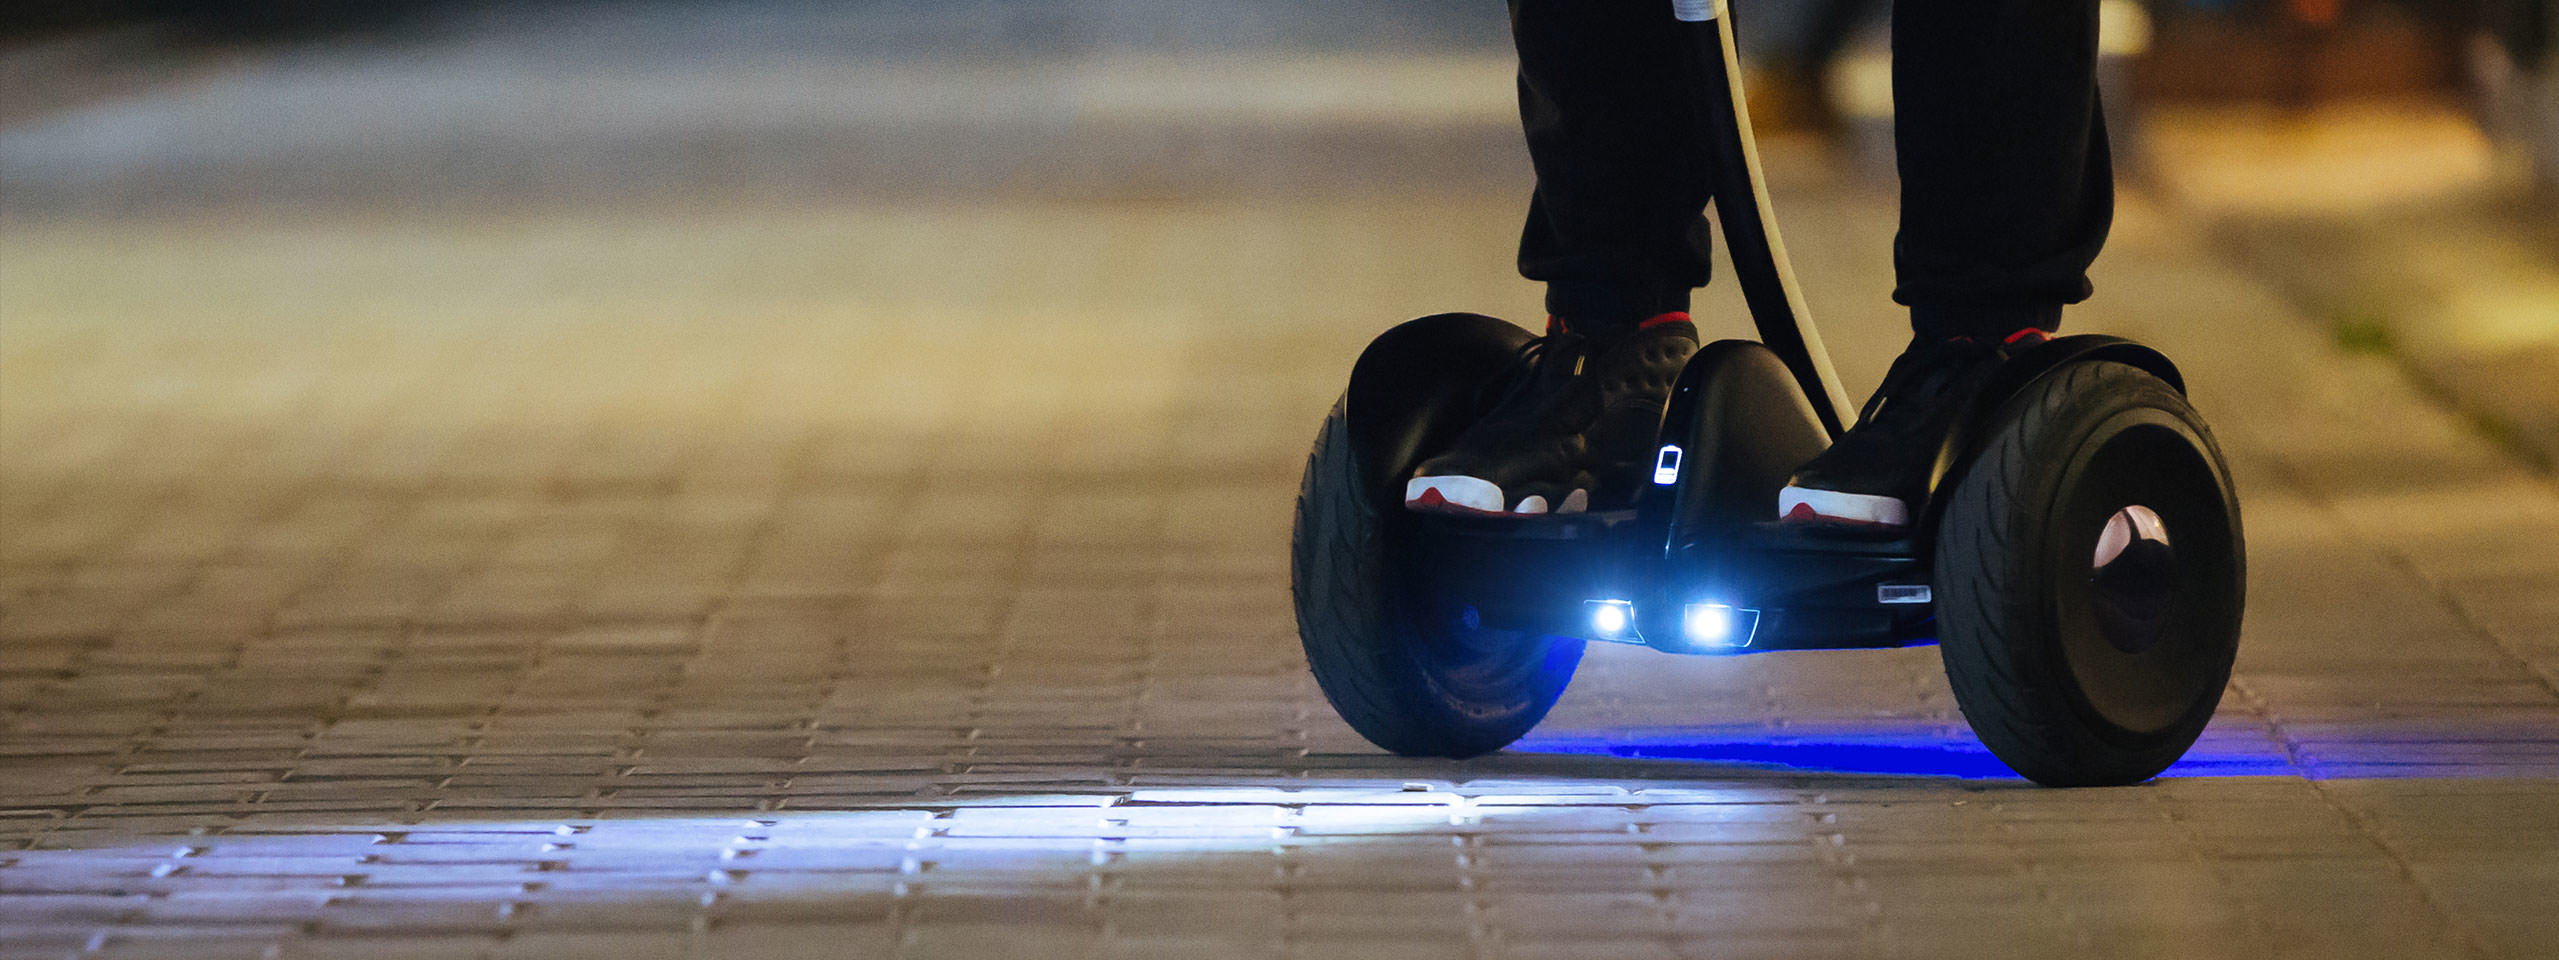 Xiaomi-hoverboard-made-with-Ninebot-and-Segway-photo-4a